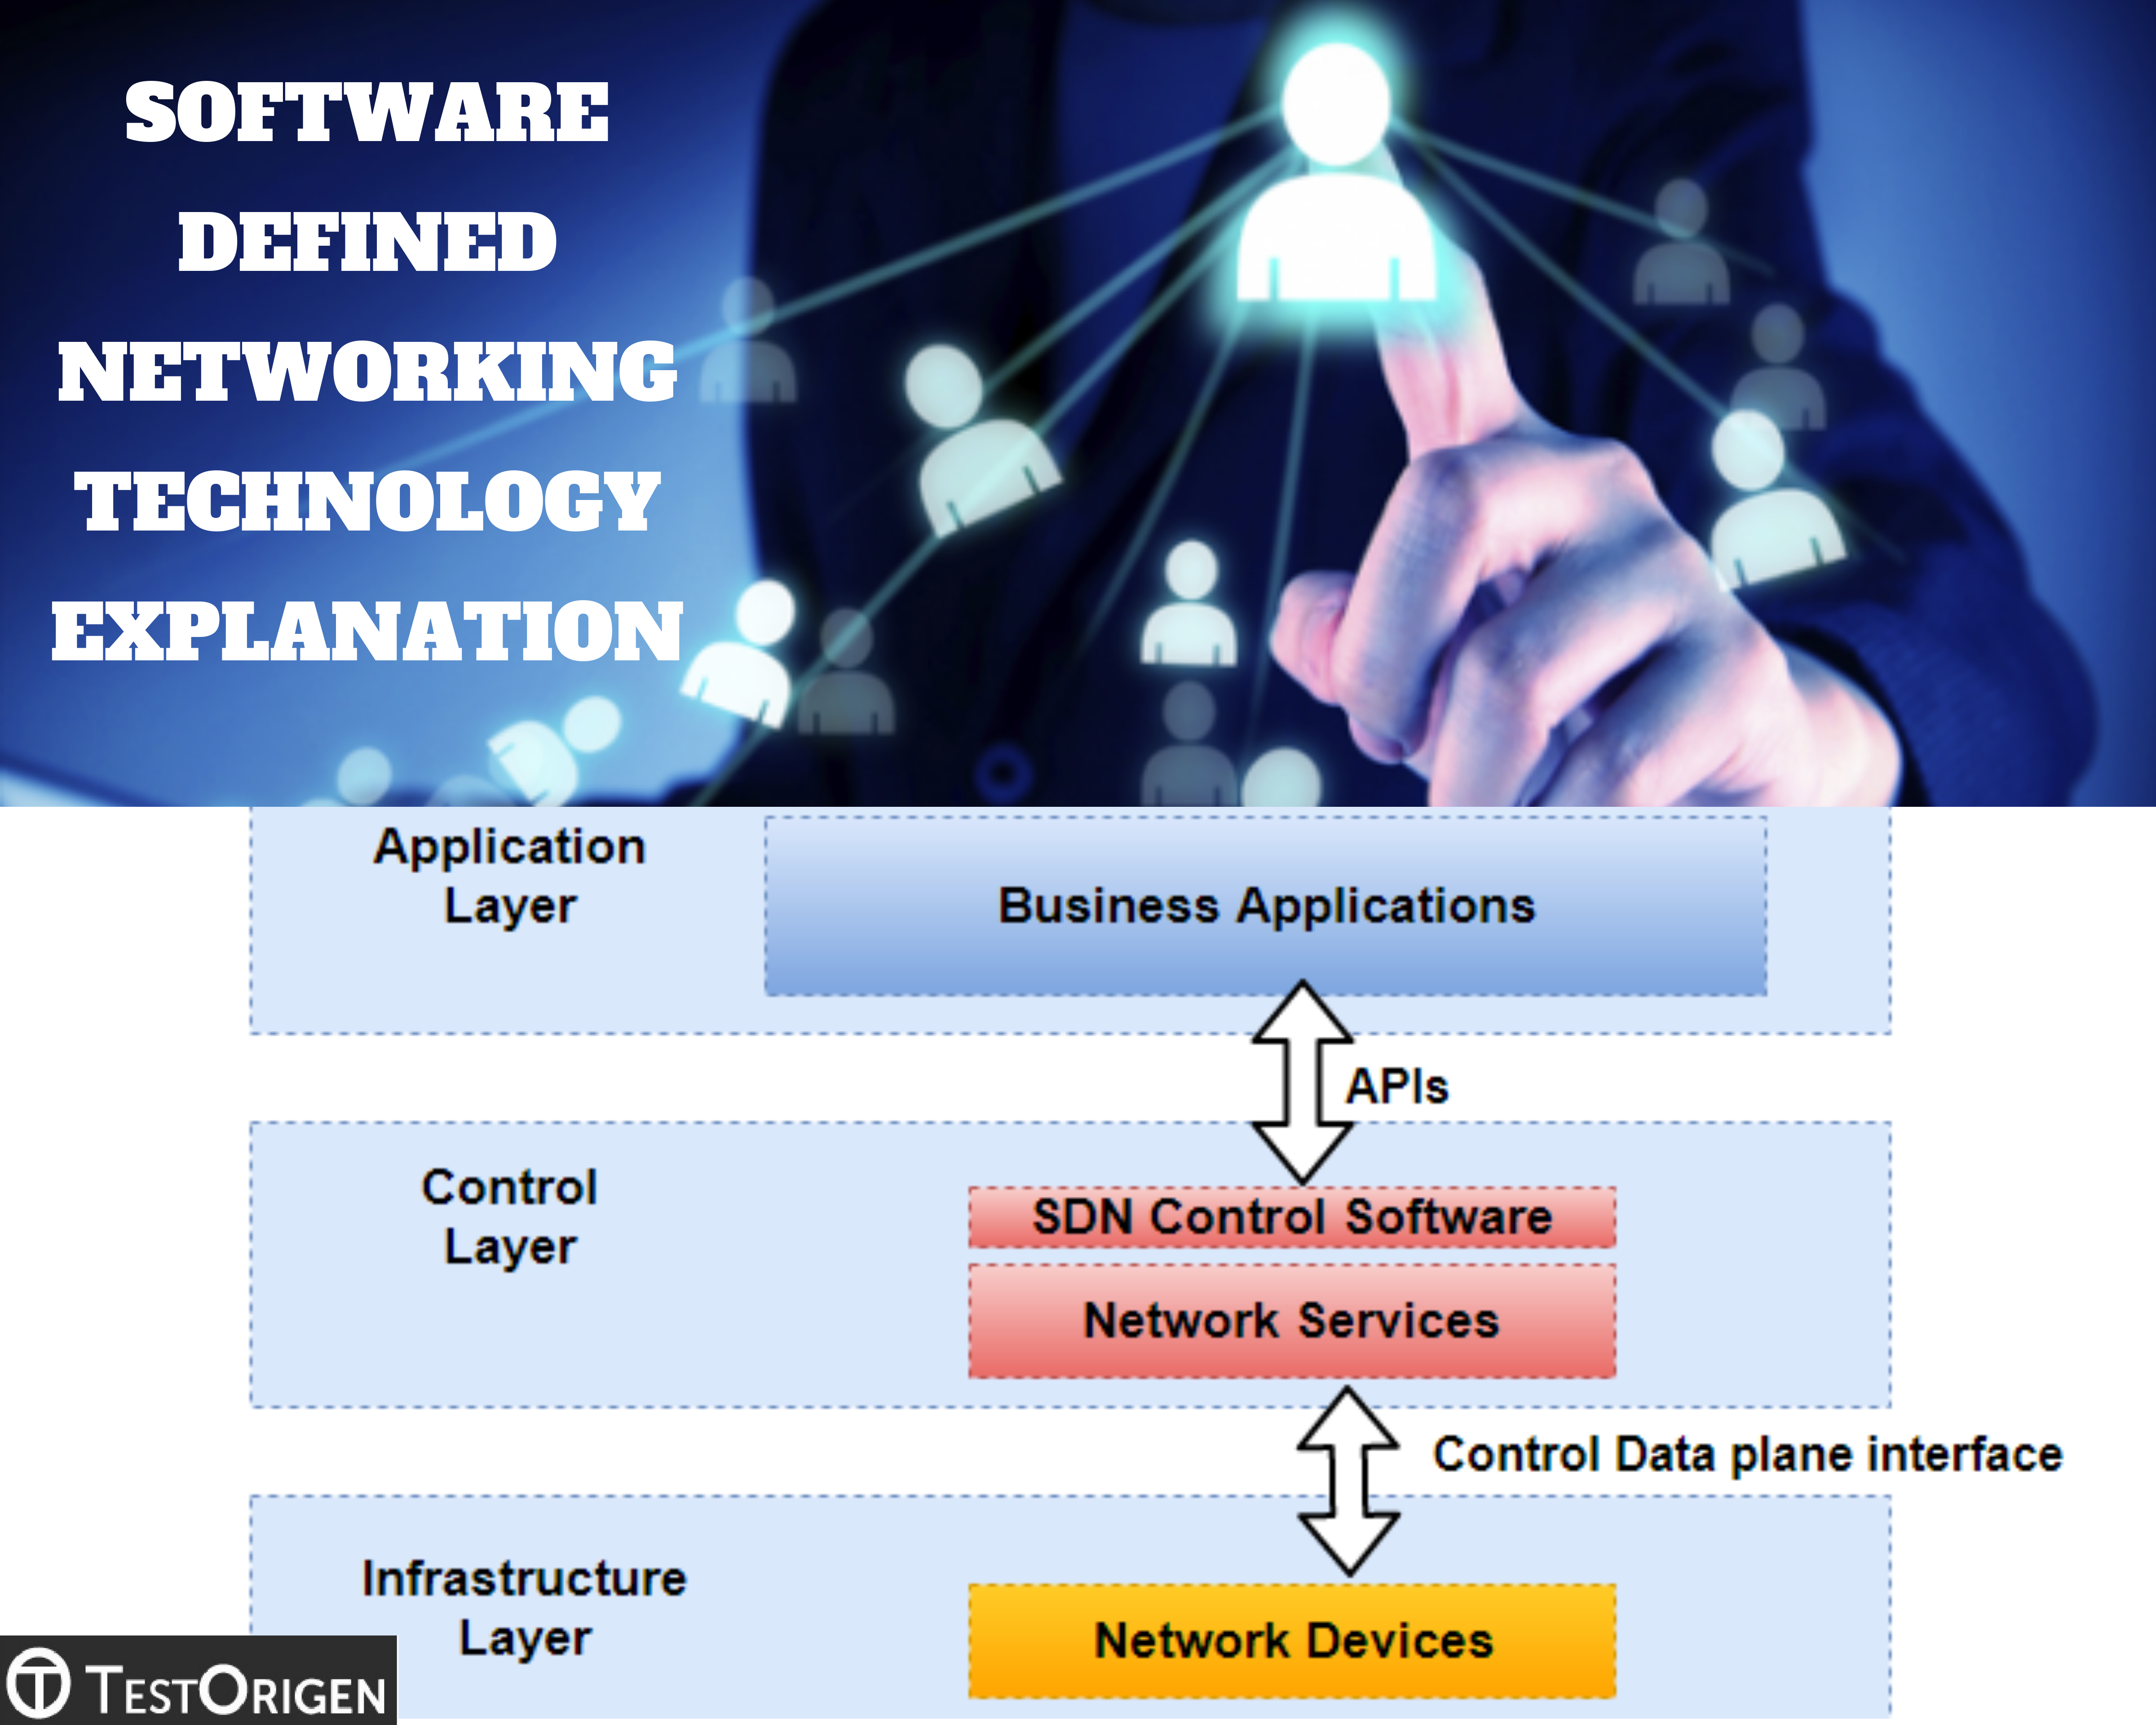 Software Defined Networking Technology Explanation